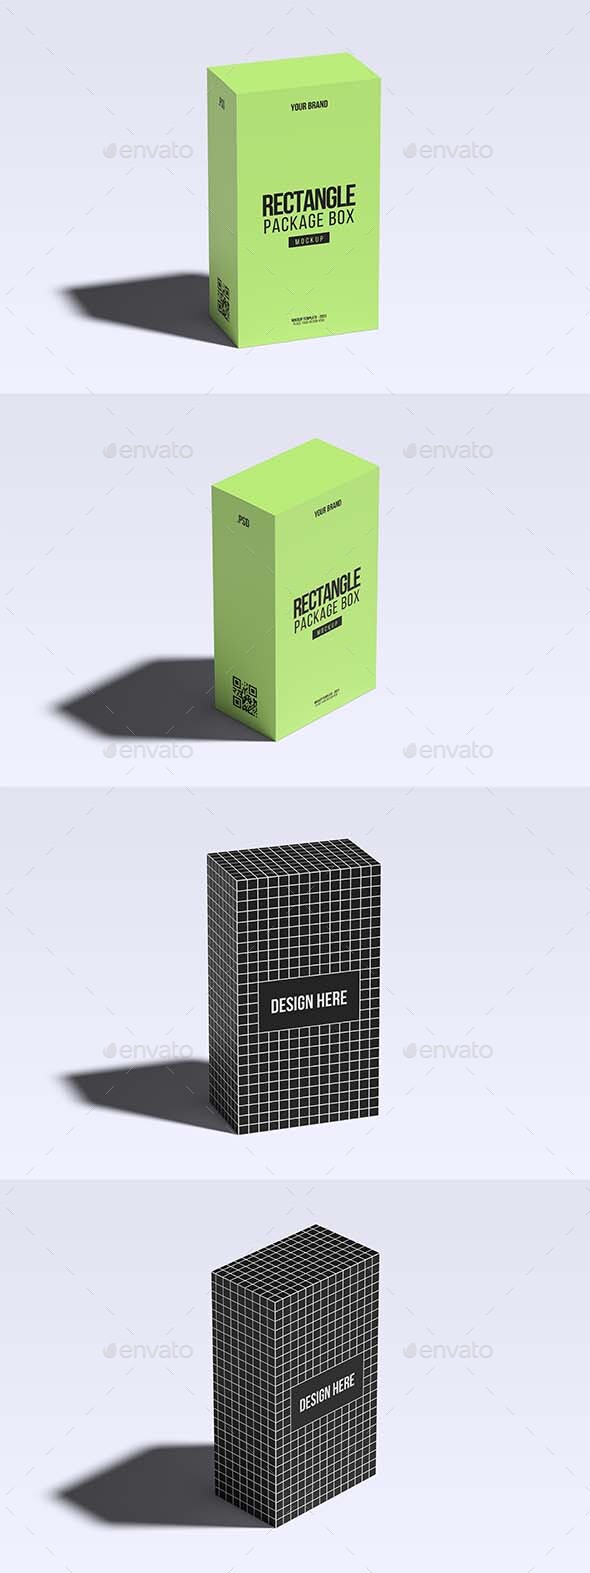 Vertical Rectangle Package Box Mockup